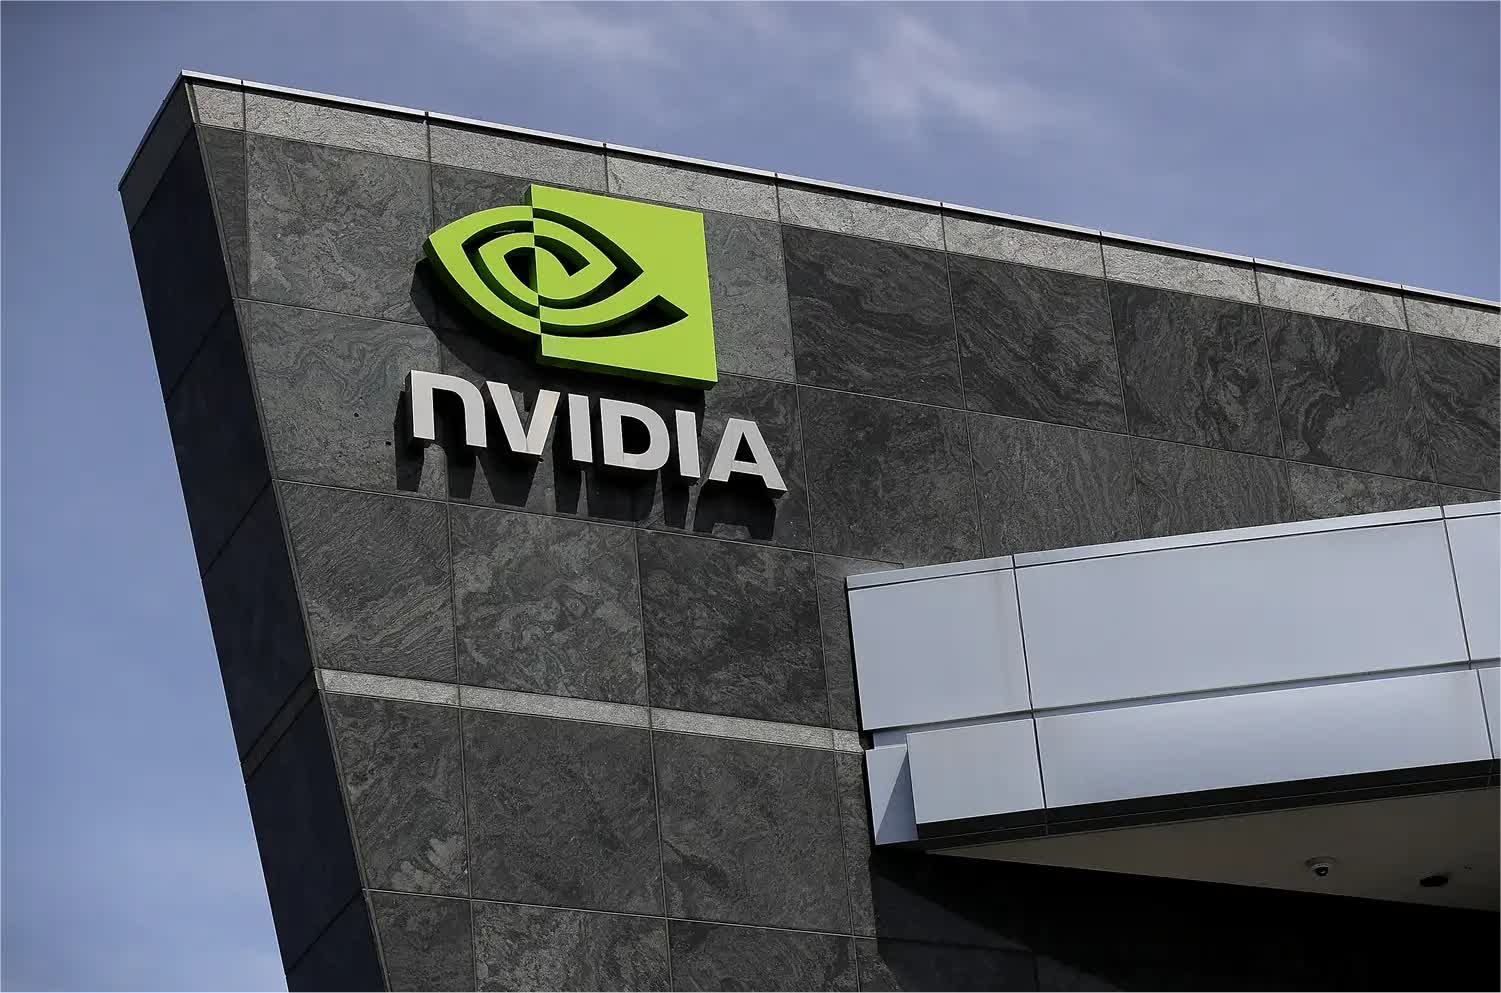 Nvidia soaring market cap nears Amazon and Alphabet, fueled by surging AI demand